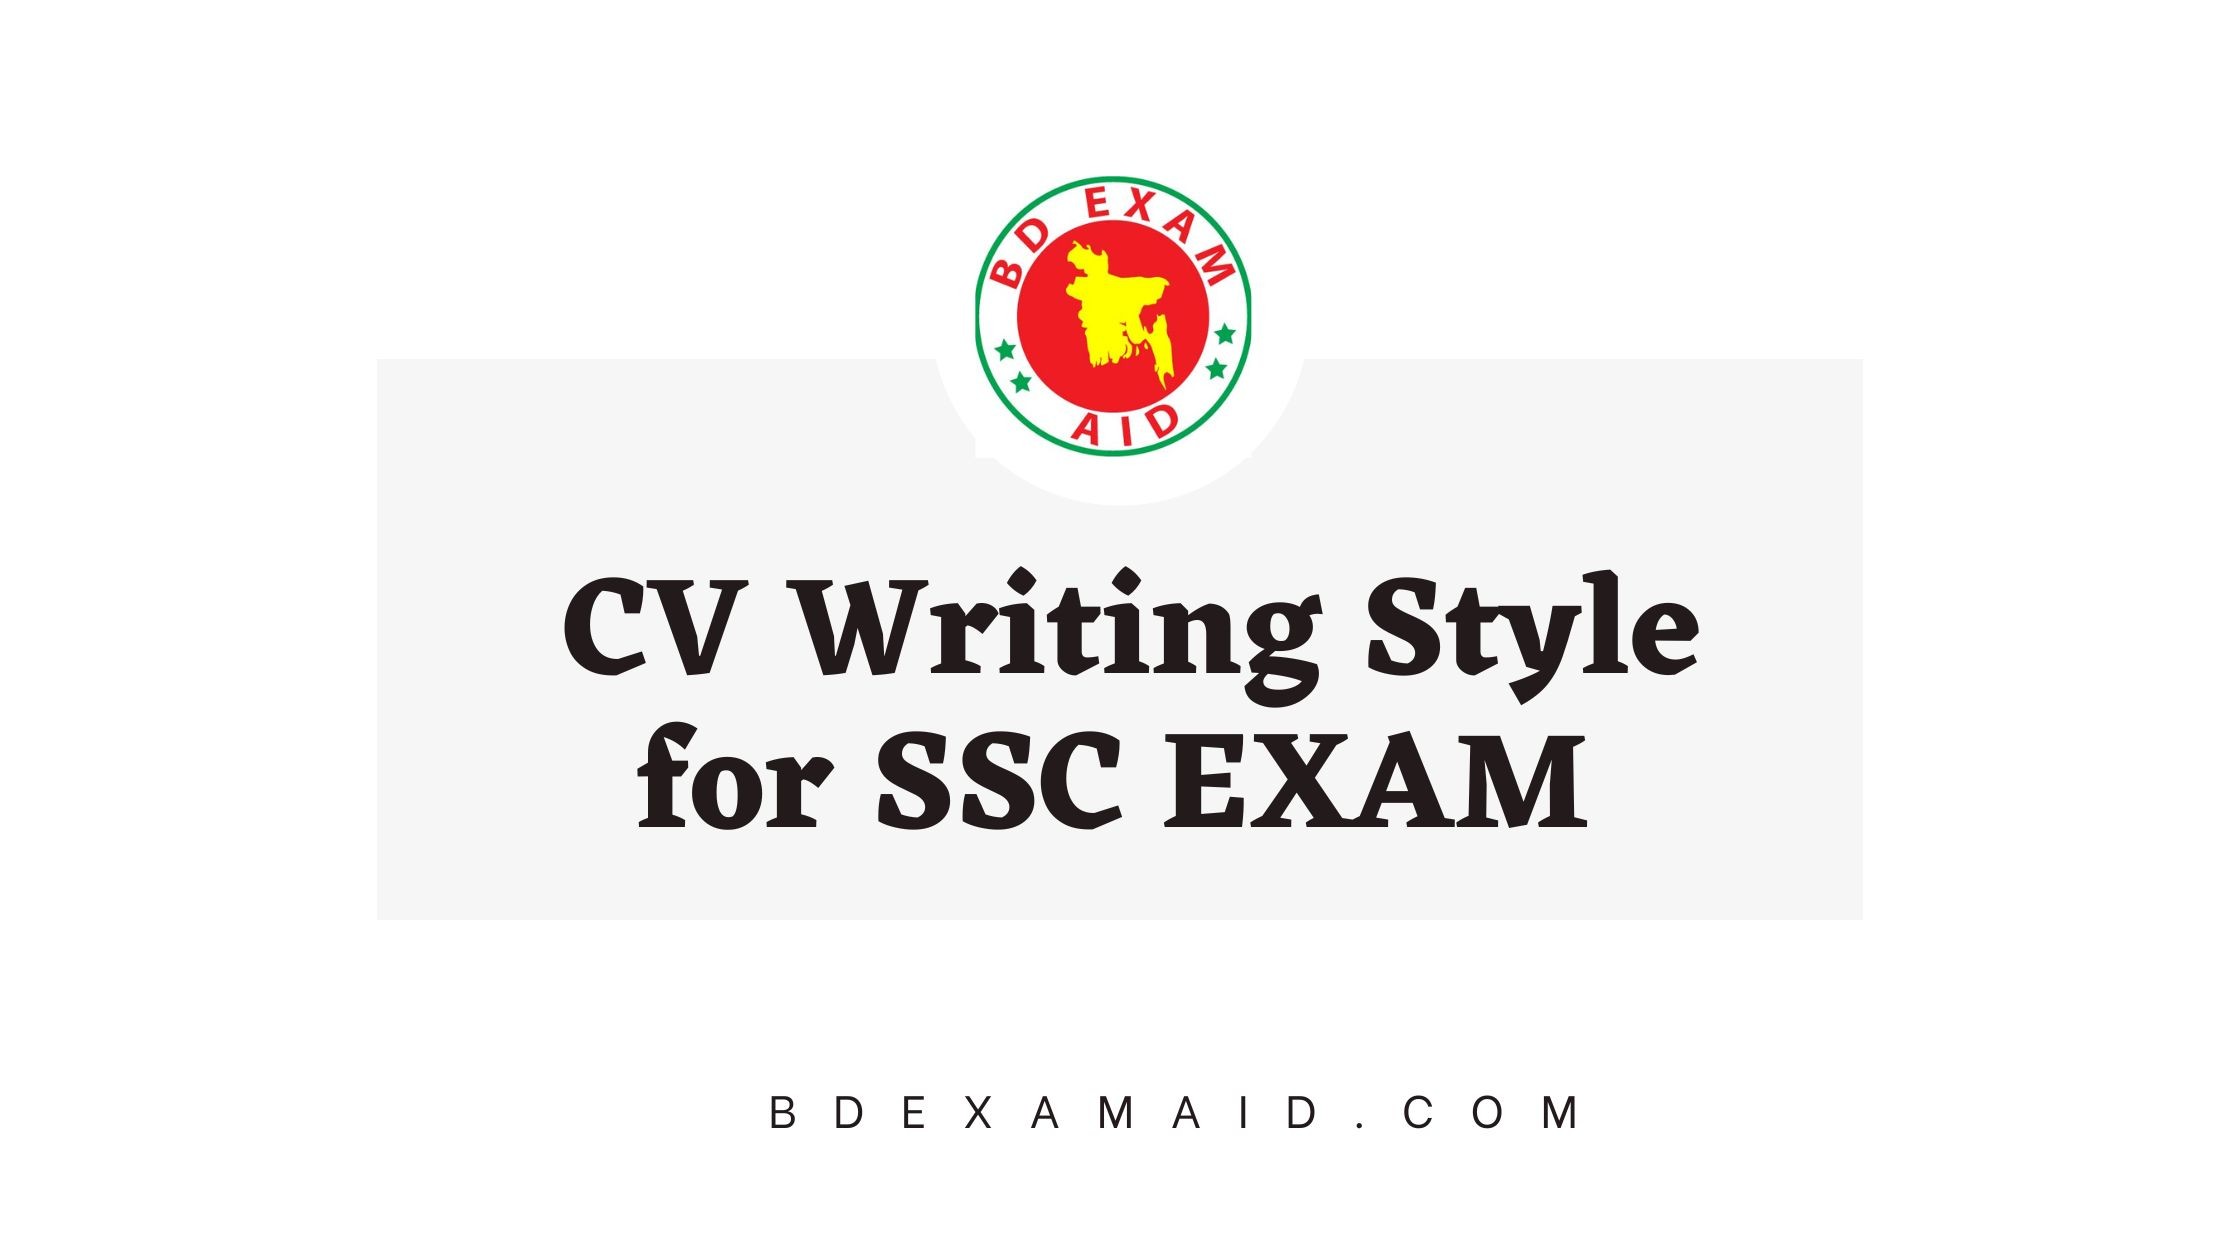 CV Writing Style for SSC exam